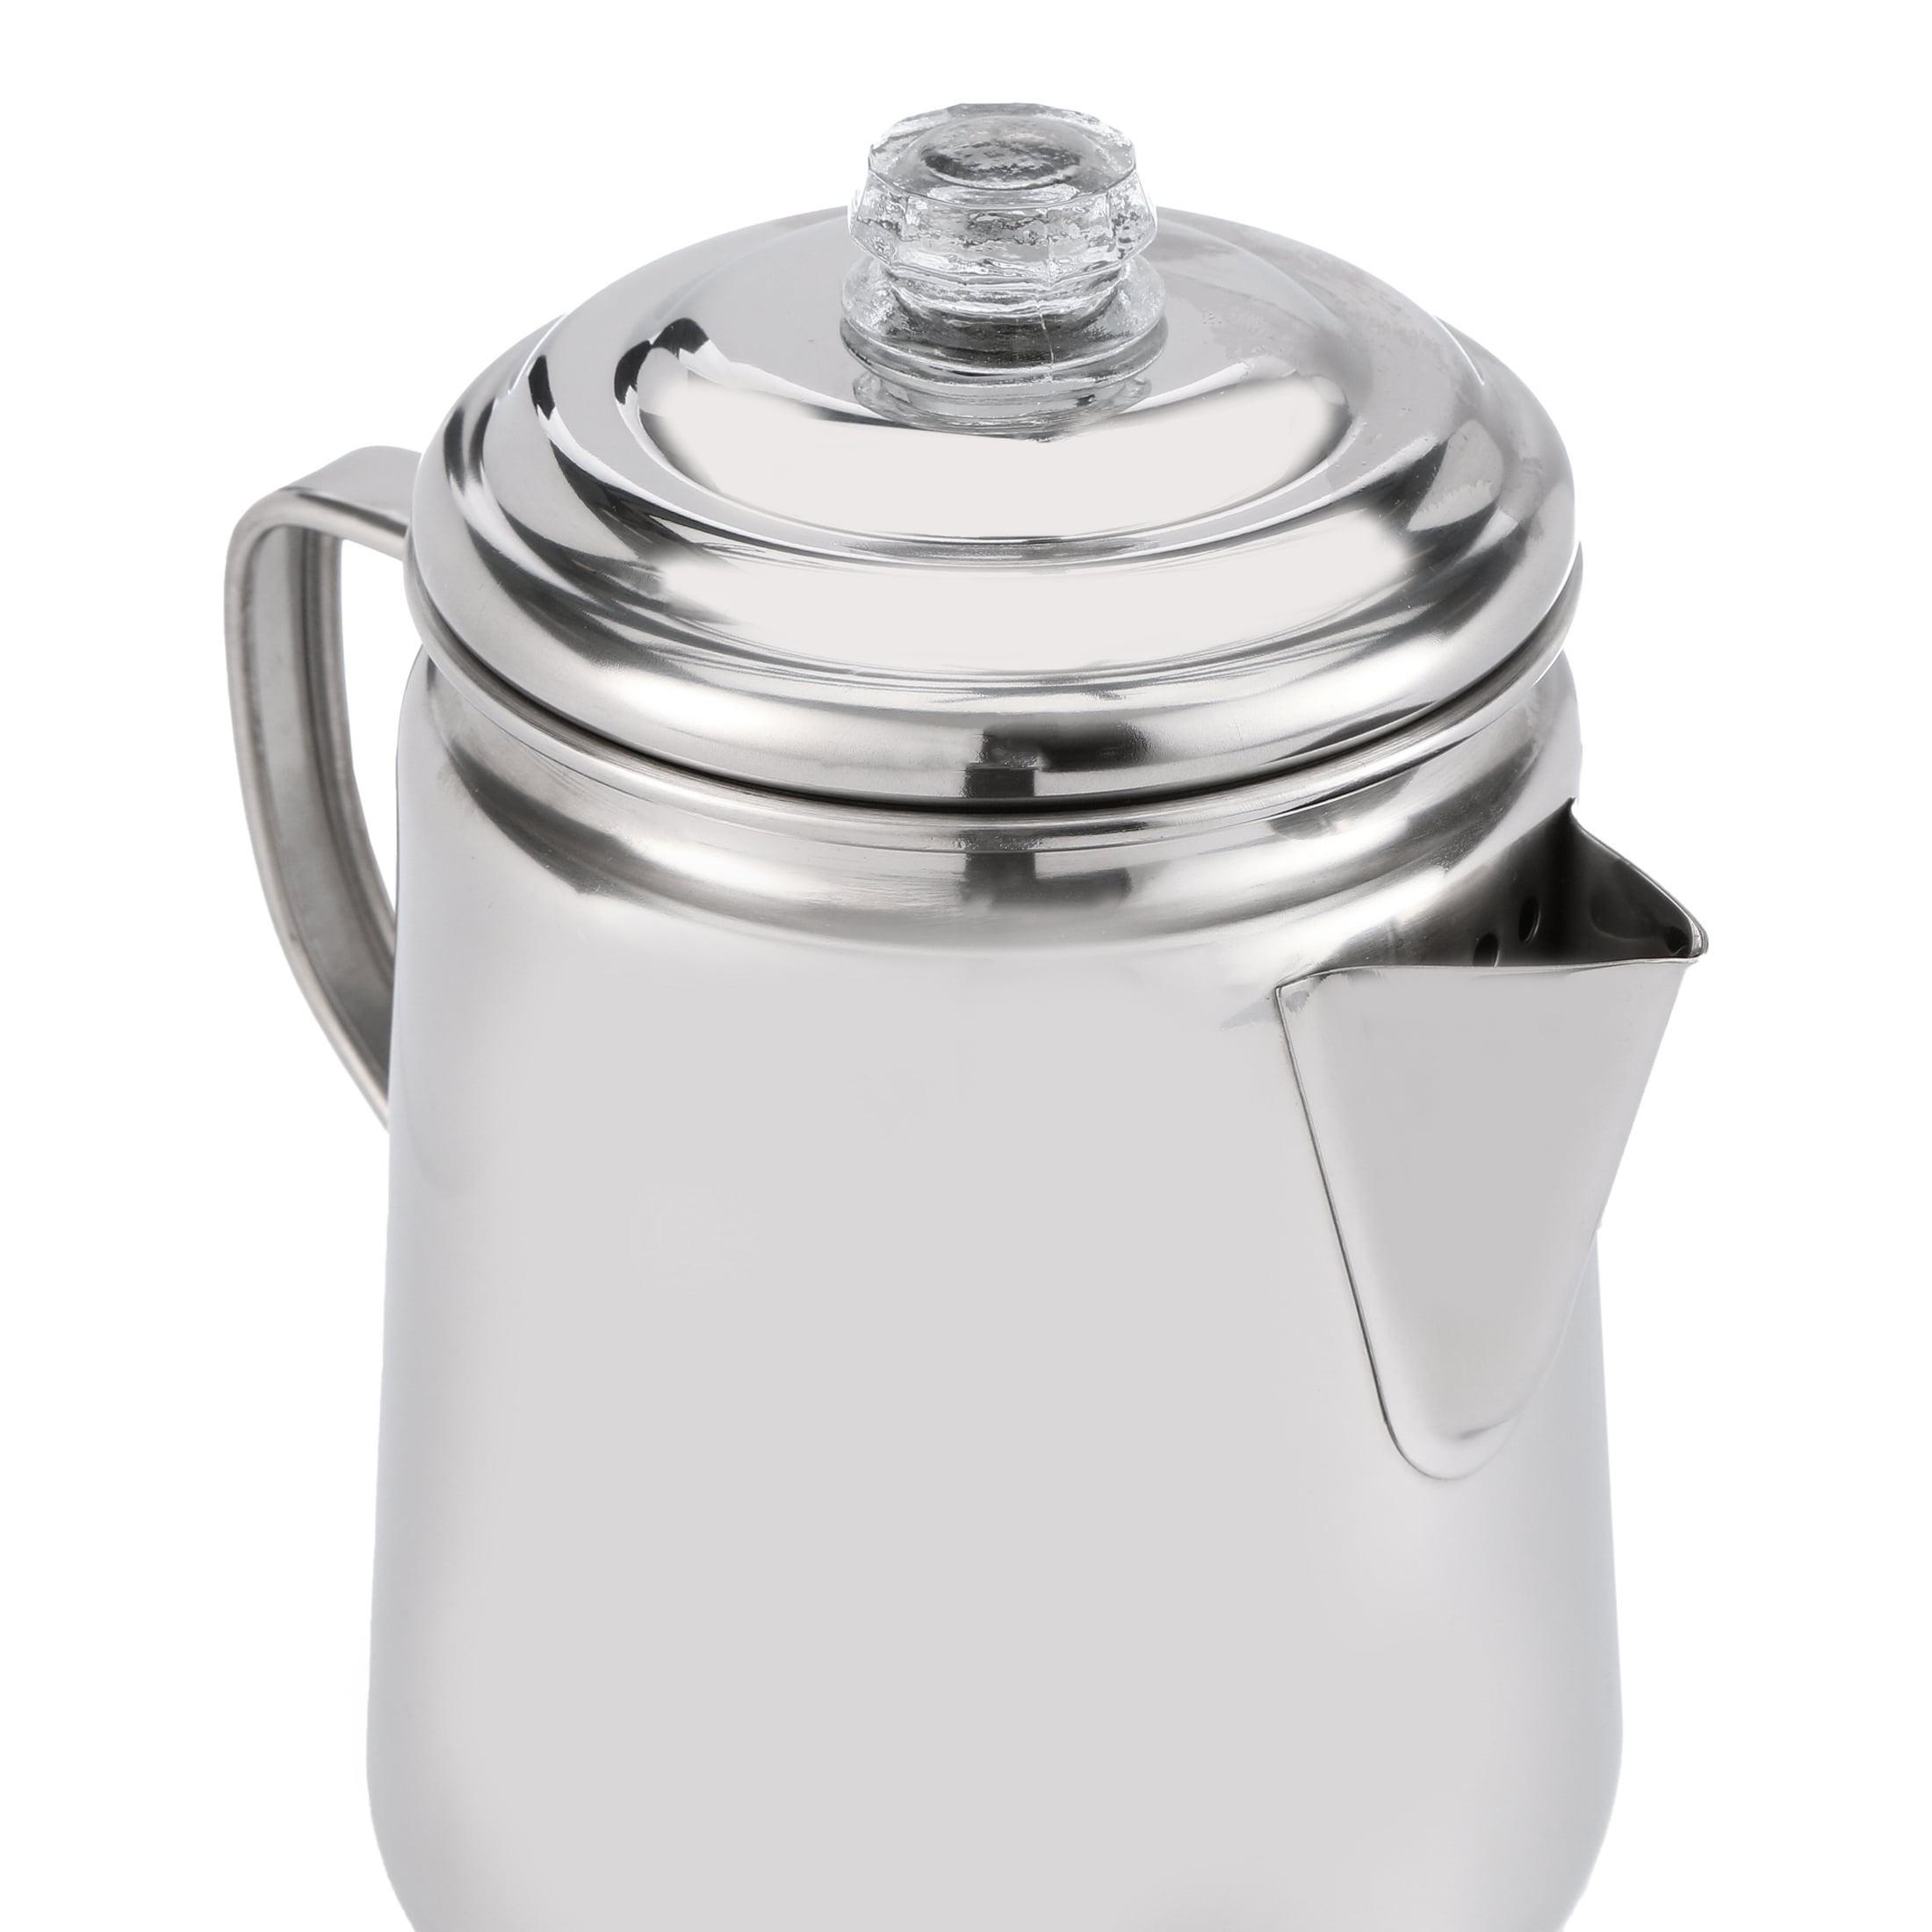 Coleman 12-cup Stainless Steel Percolator - 96oz : Target